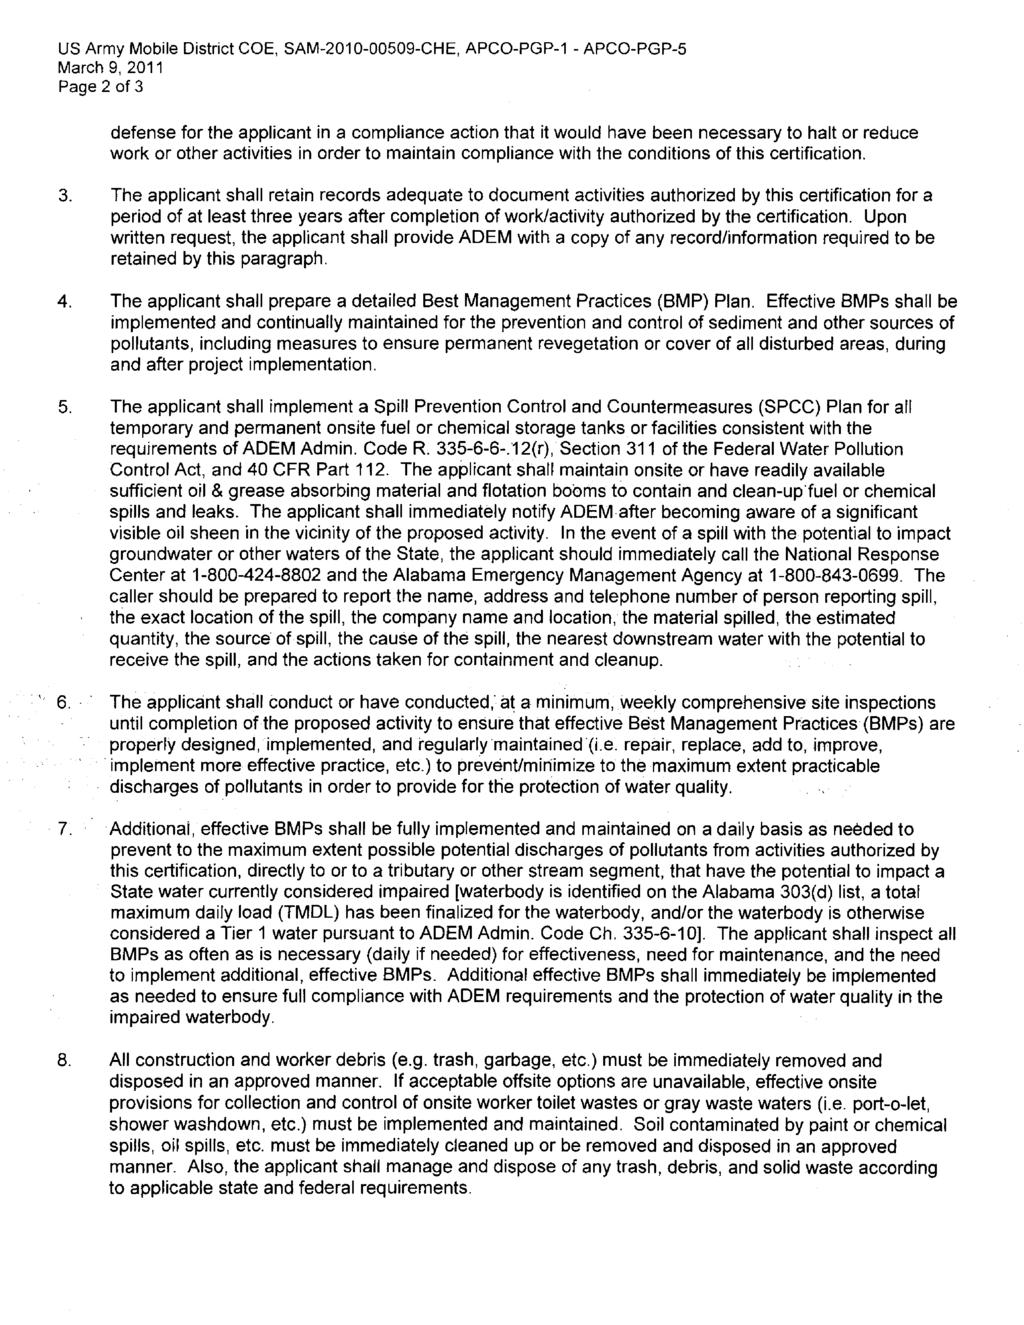 US Army Mobile District COE, SAM-2010-00509-CHE, APCO-PGP-1 - APCO-PGP-5 March 9, 2011 Page 2 of 3 defense for the applicant in a compliance action that it would have been necessary to halt or reduce